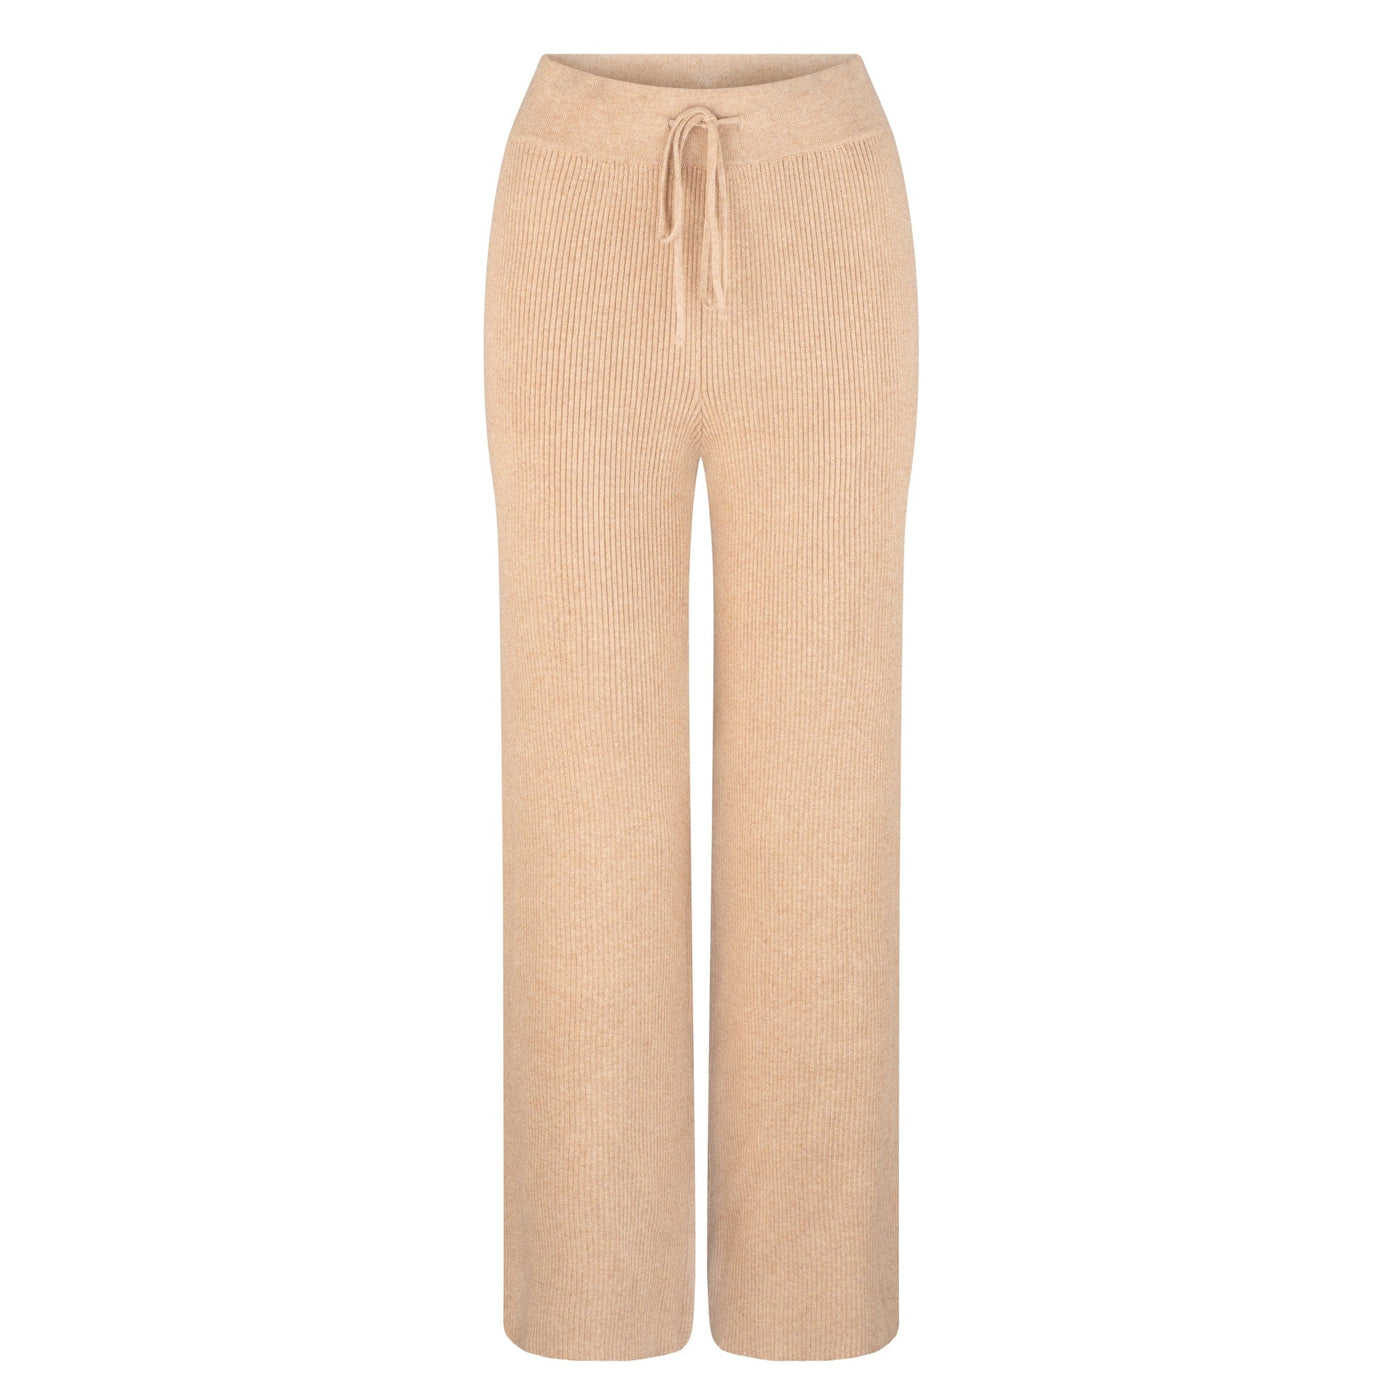 Lilly Pilly Collection Nola Knit pants made from Cotton Cashmere in Oatmeal, as a 3D model showing front view